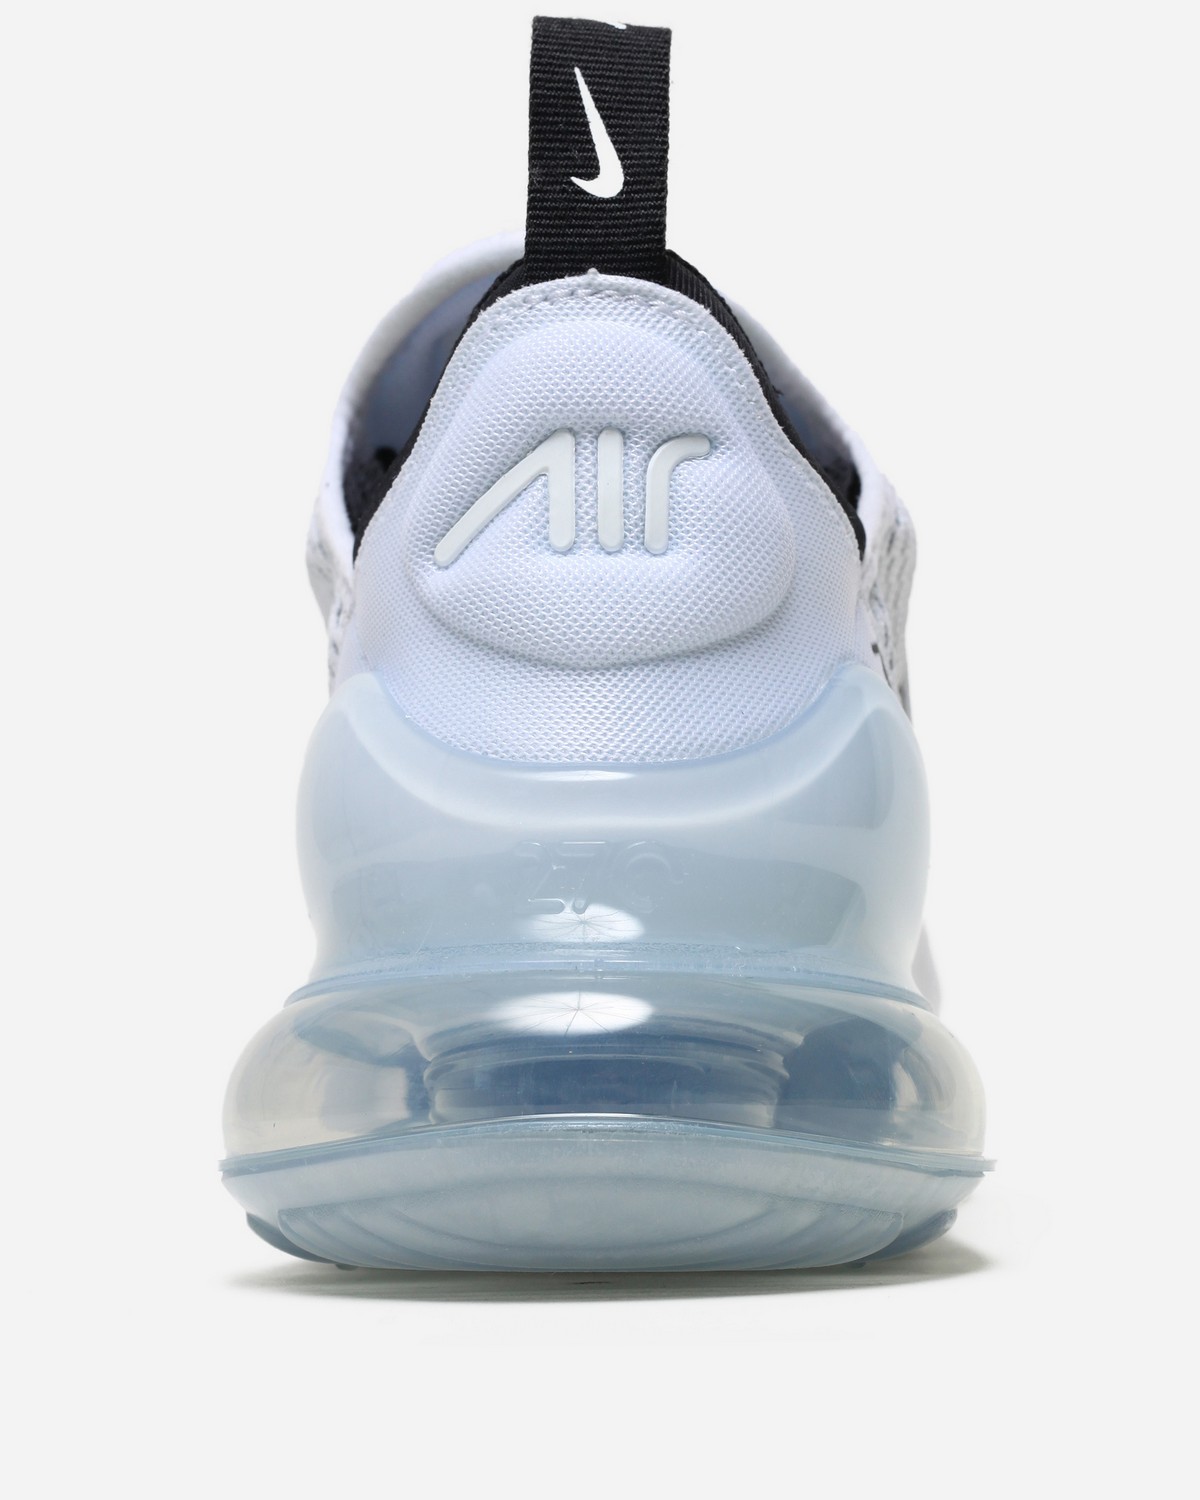 Nike Shows Icy White Air Max 270 For Women1200 x 1500